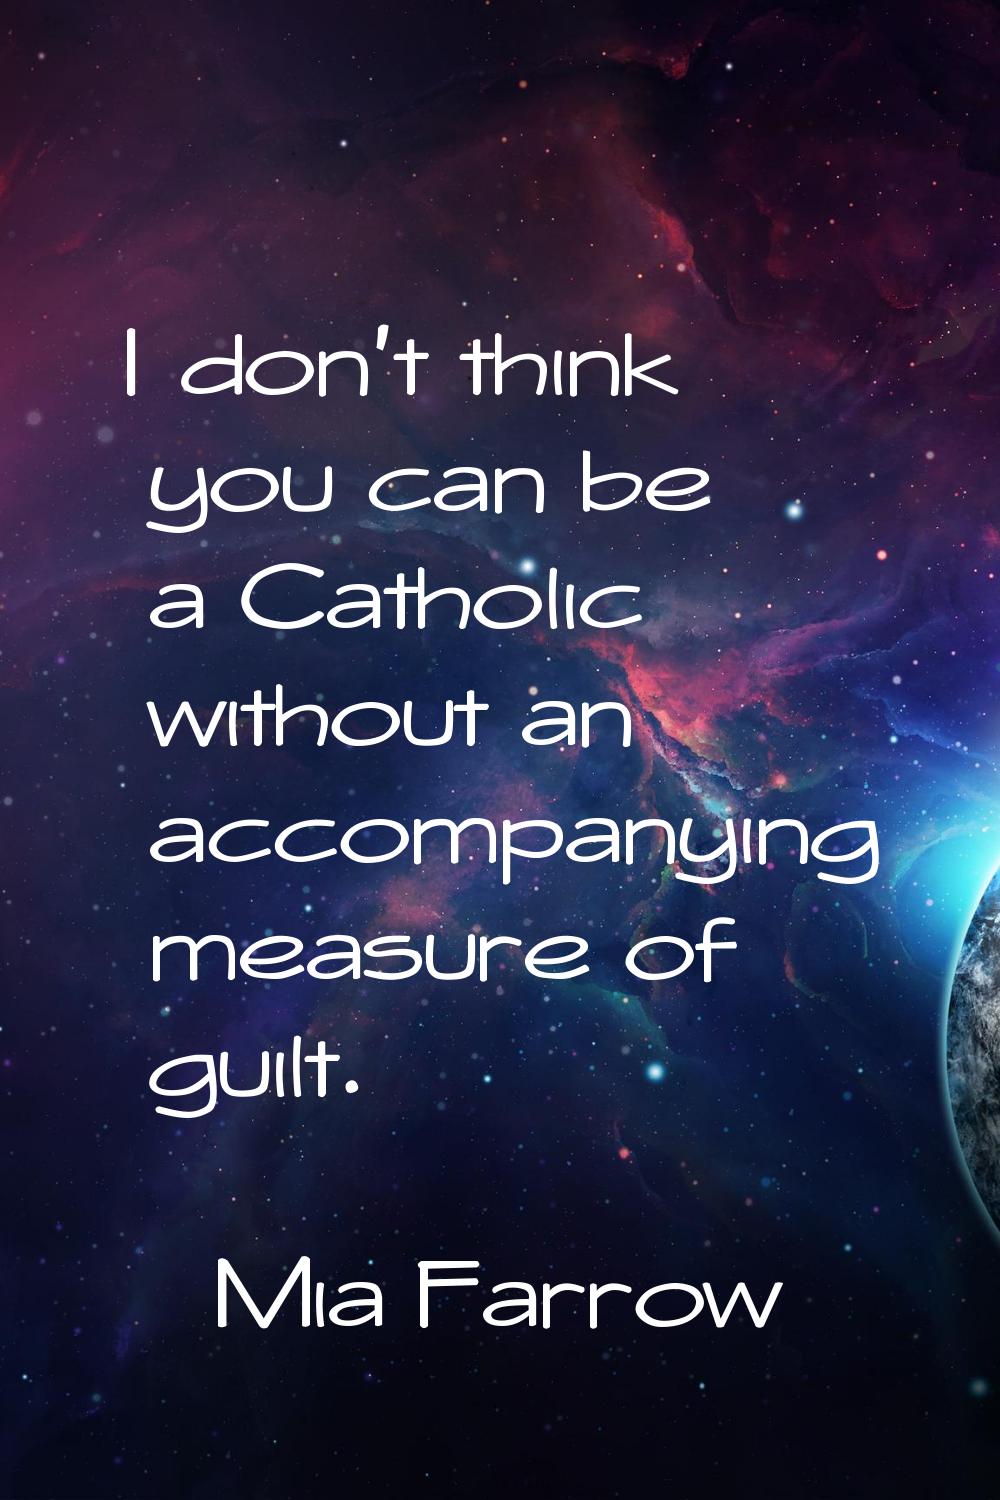 I don't think you can be a Catholic without an accompanying measure of guilt.